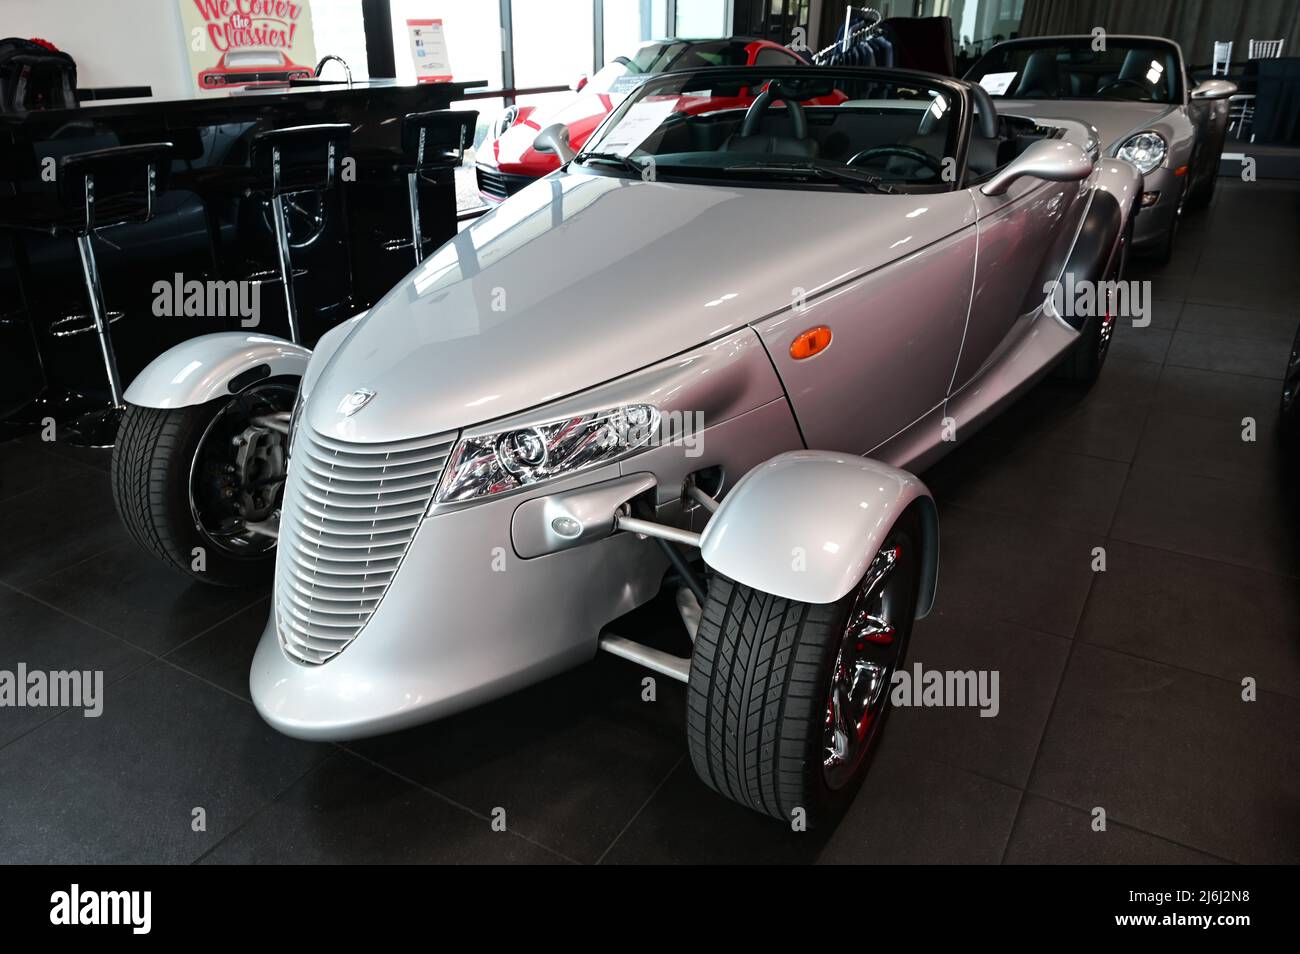 Plymouth Prowler. Stock Photo